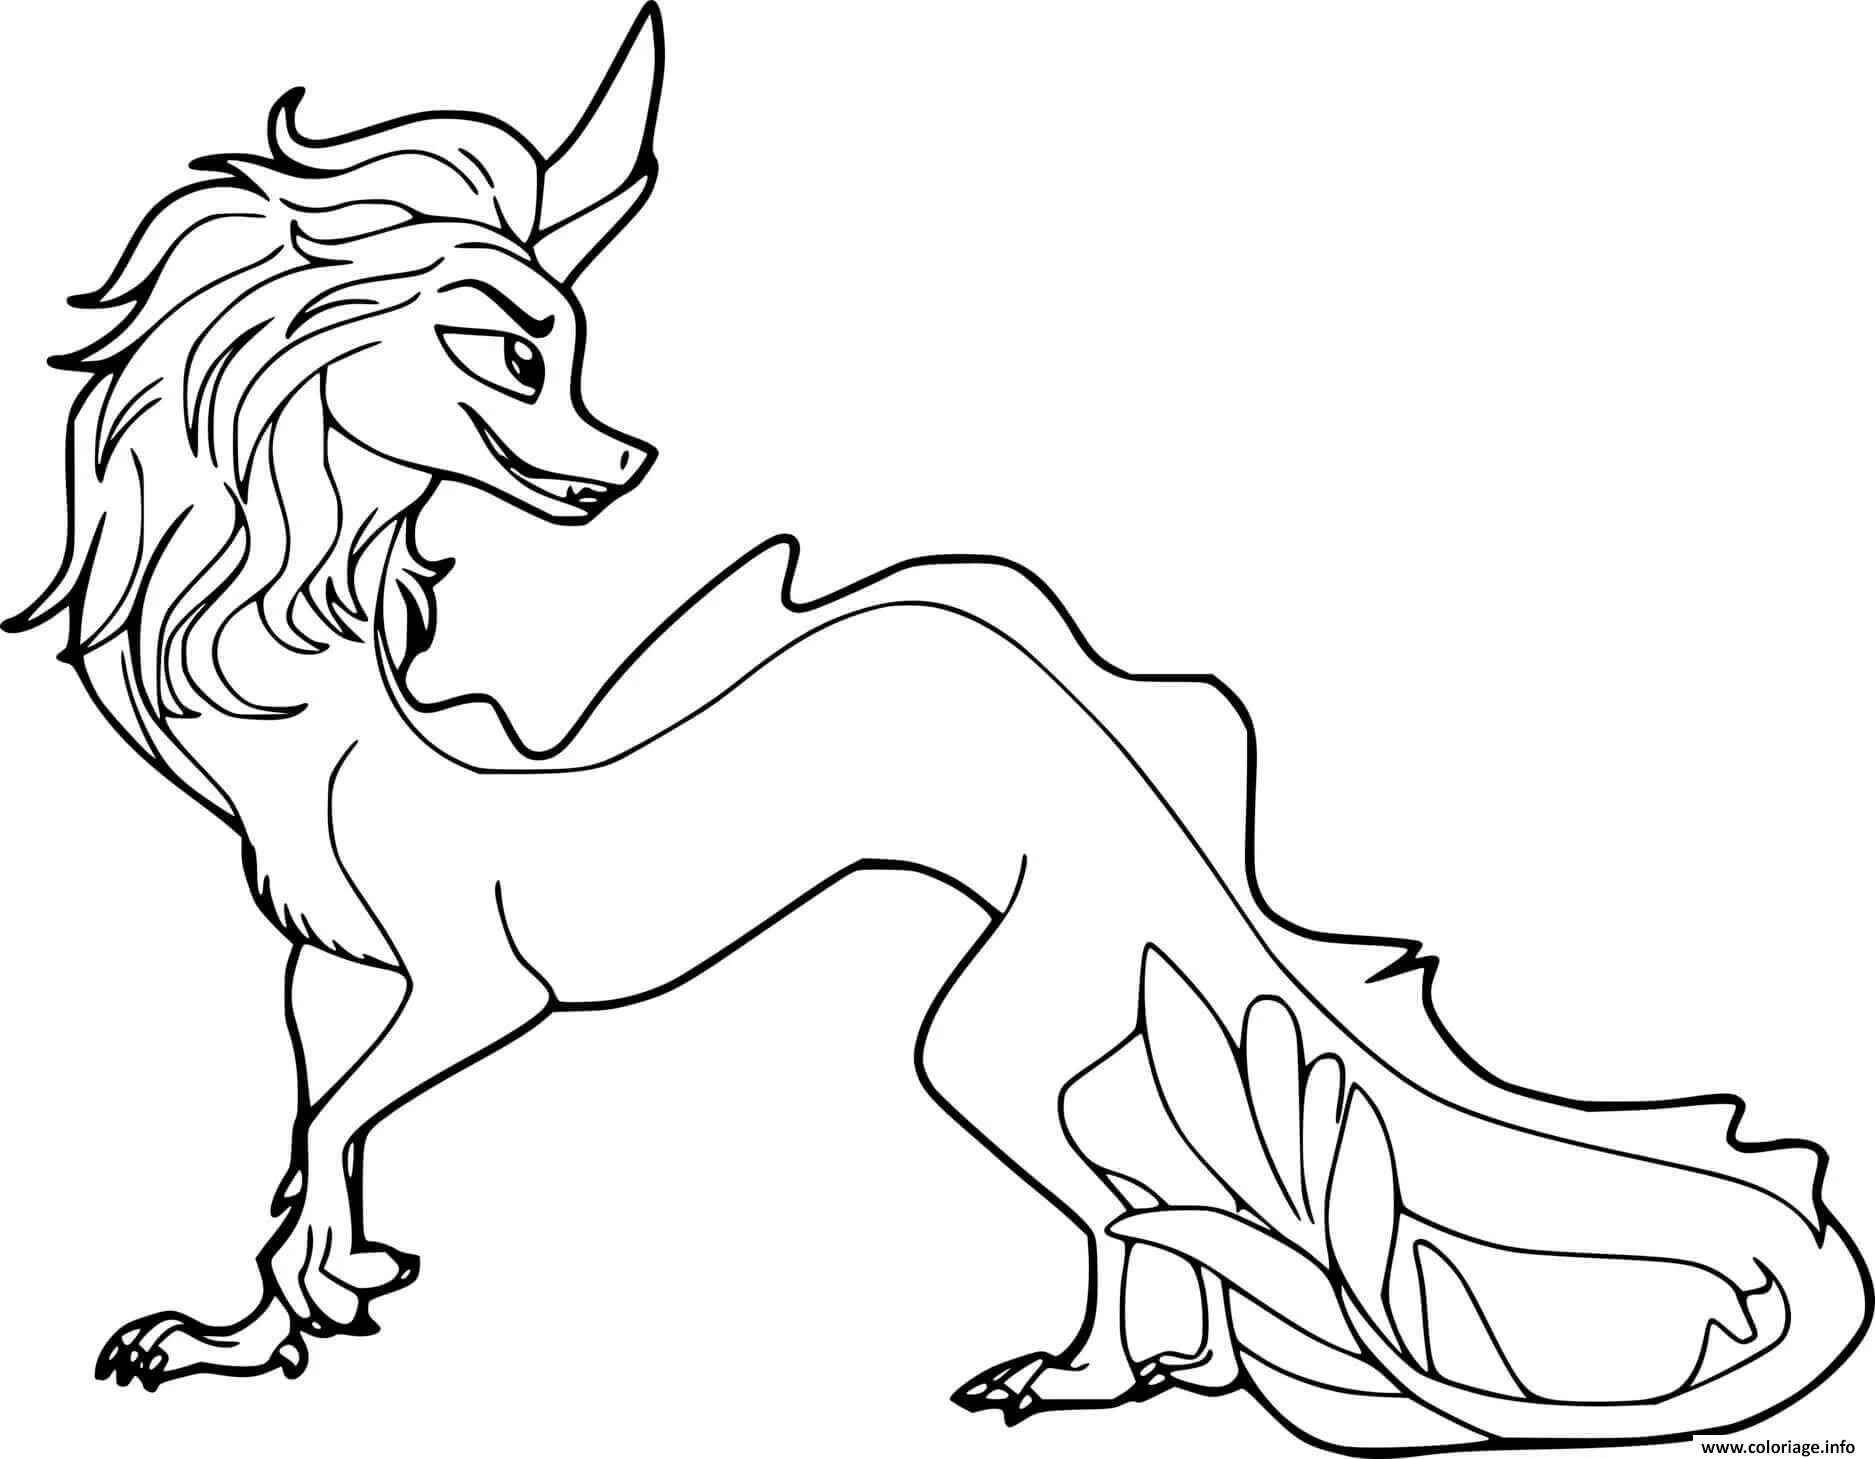 Refreshing penguin dragon coloring page